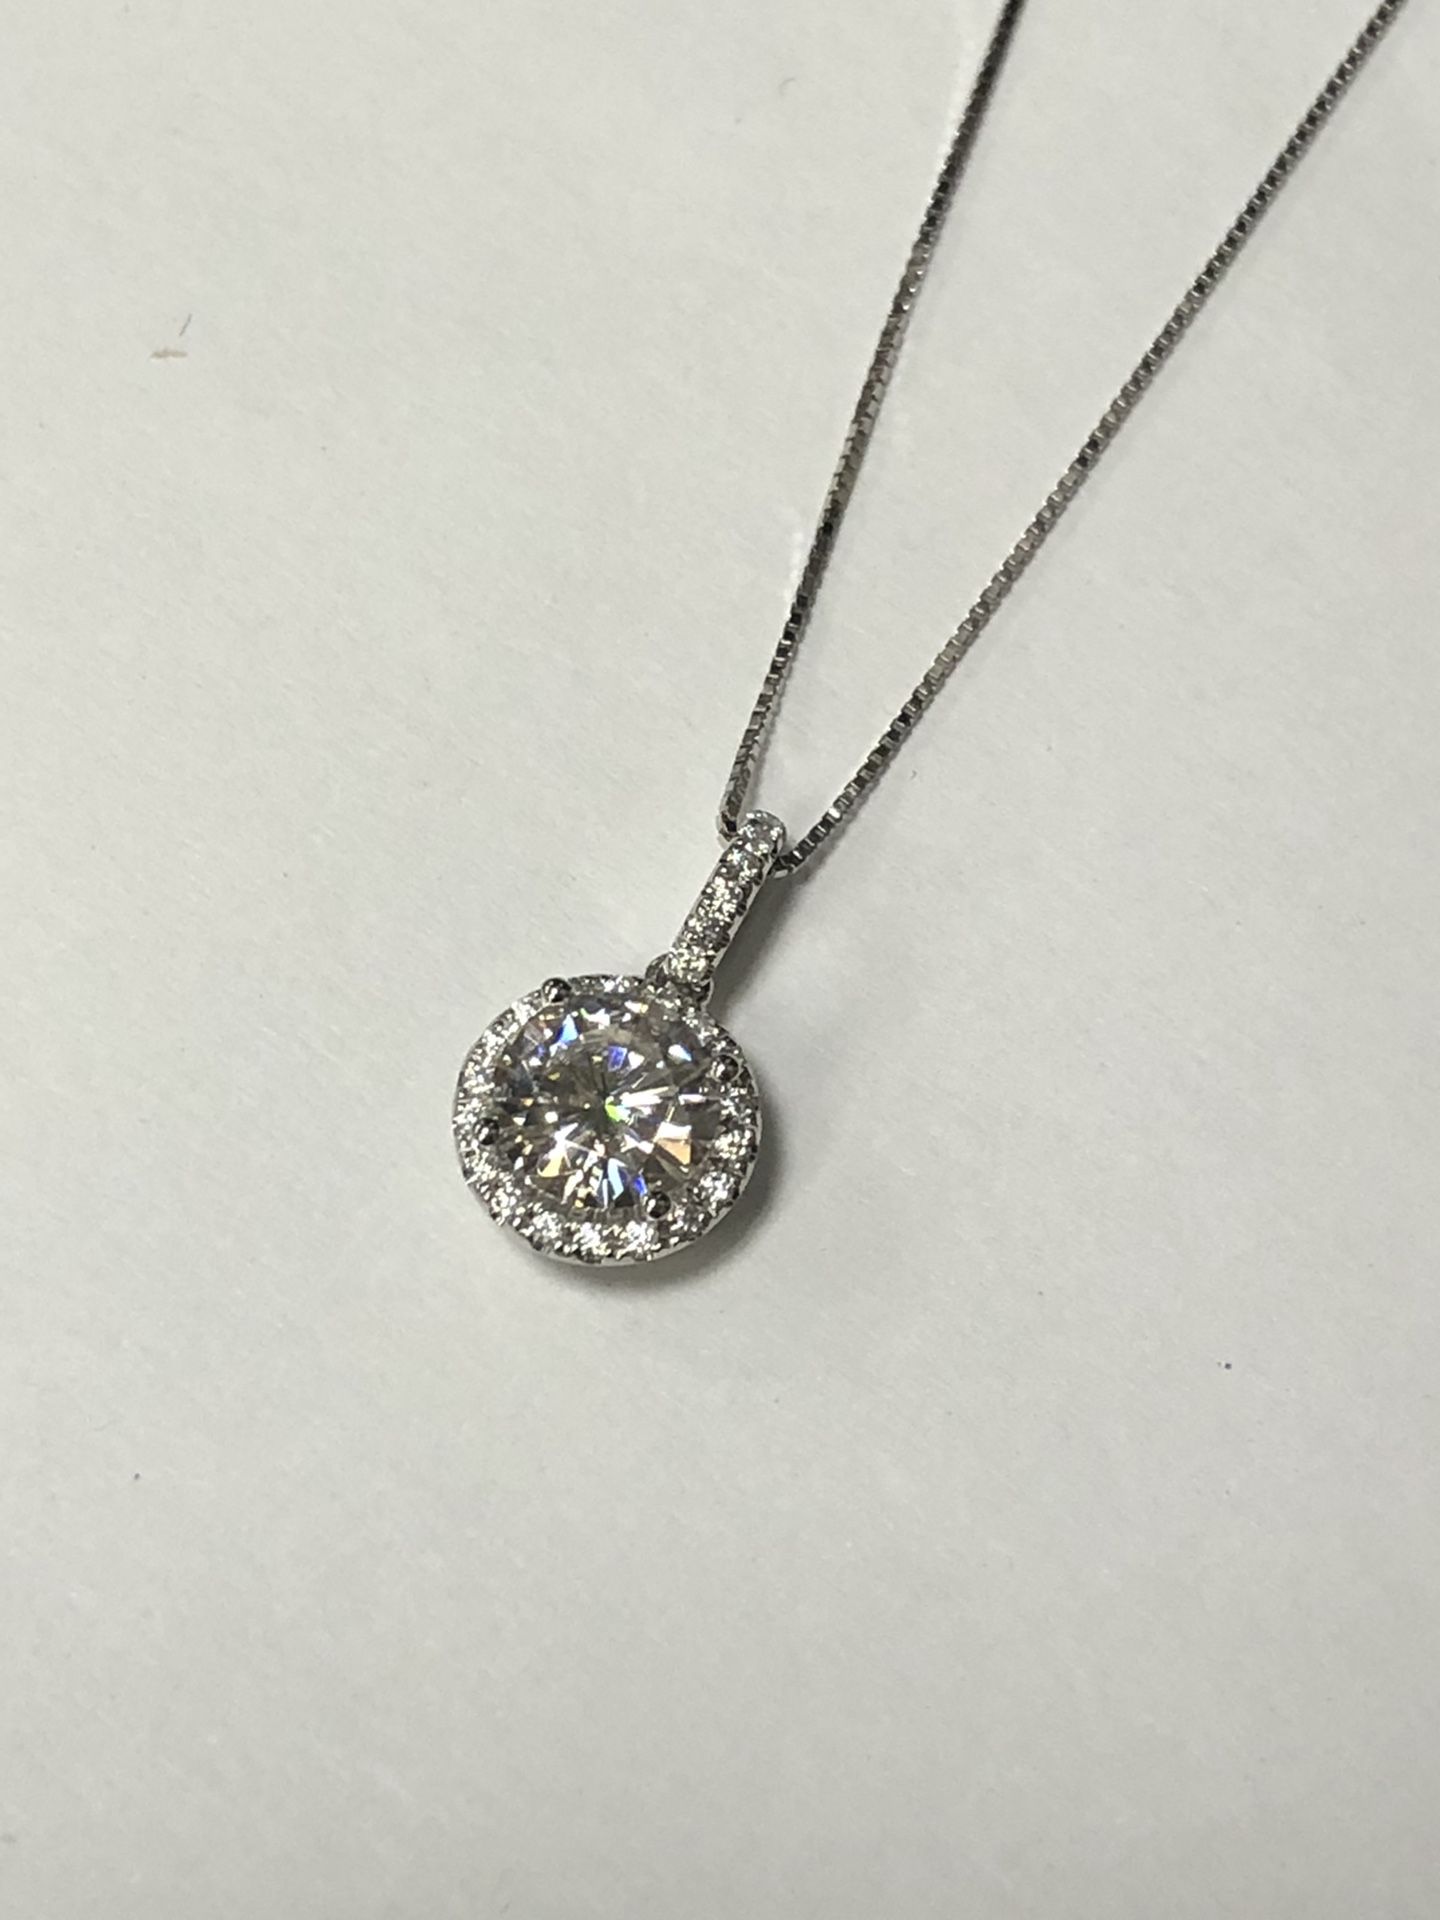 Gold and moissanite pendant